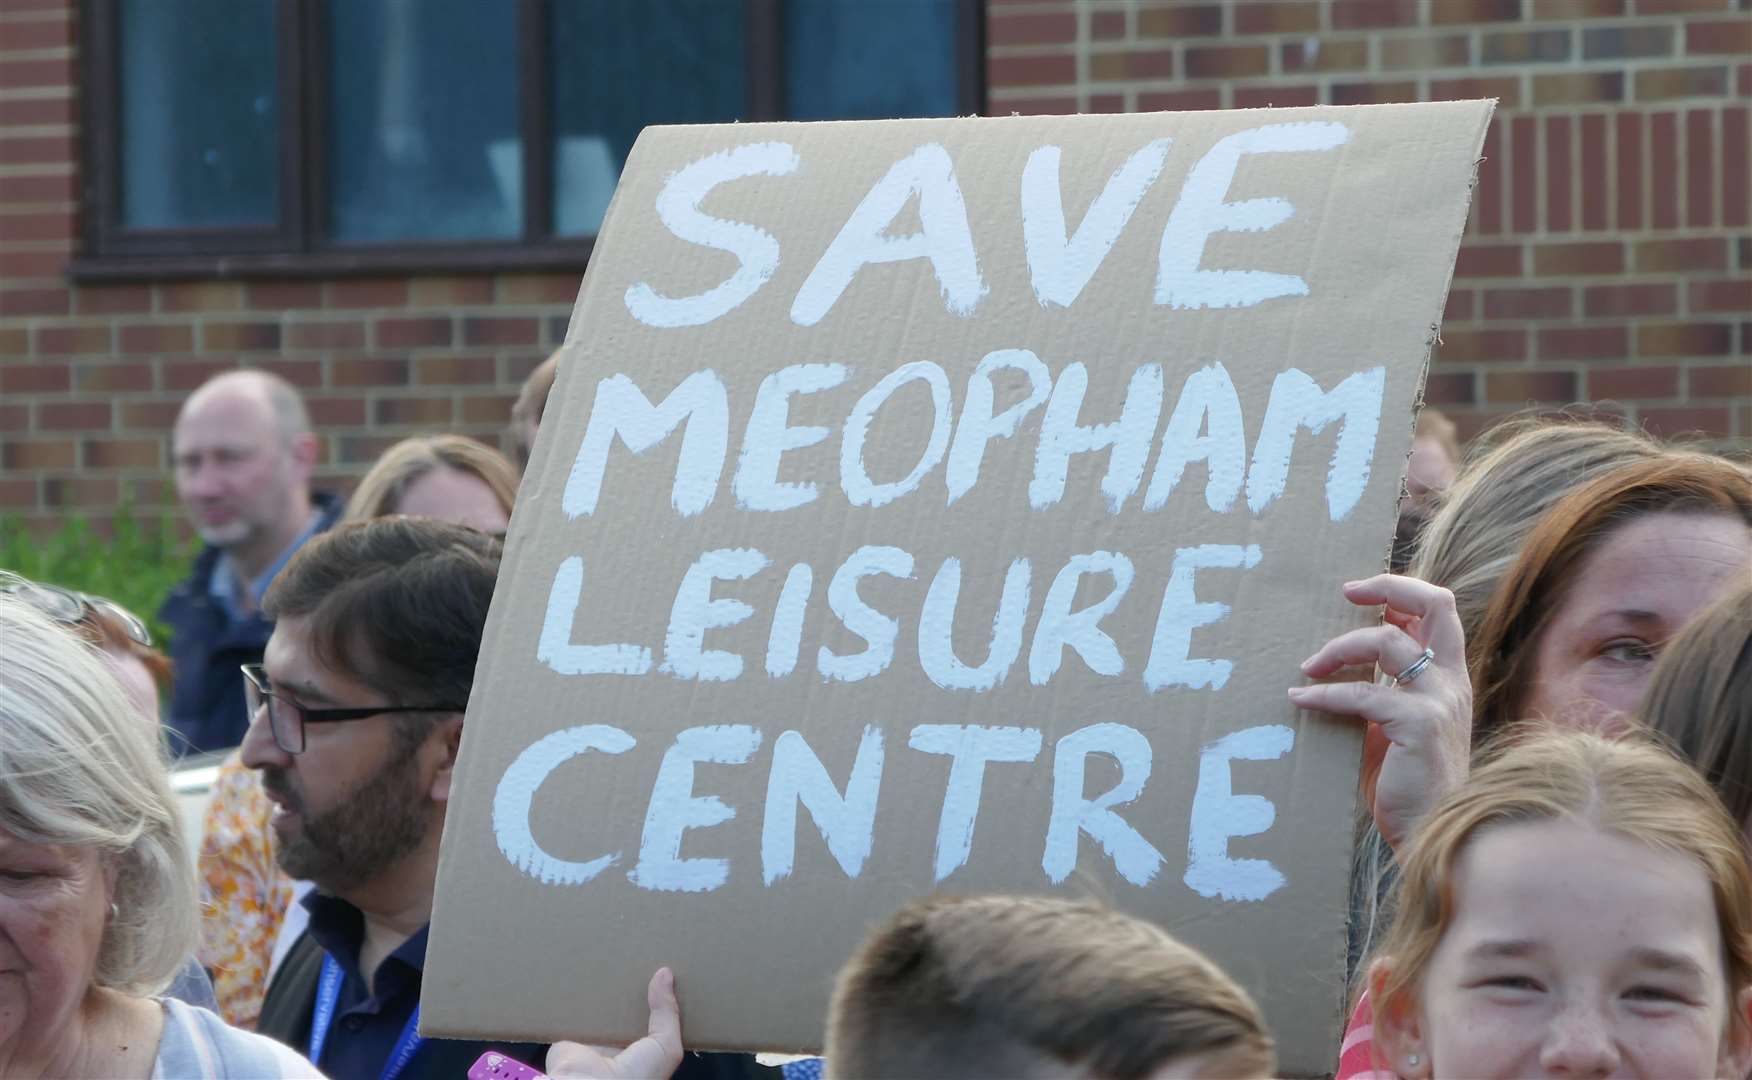 Meopham Leisure Centre could close by the end of the month if an agreement cannot be reached. Photo: Anna Roberts